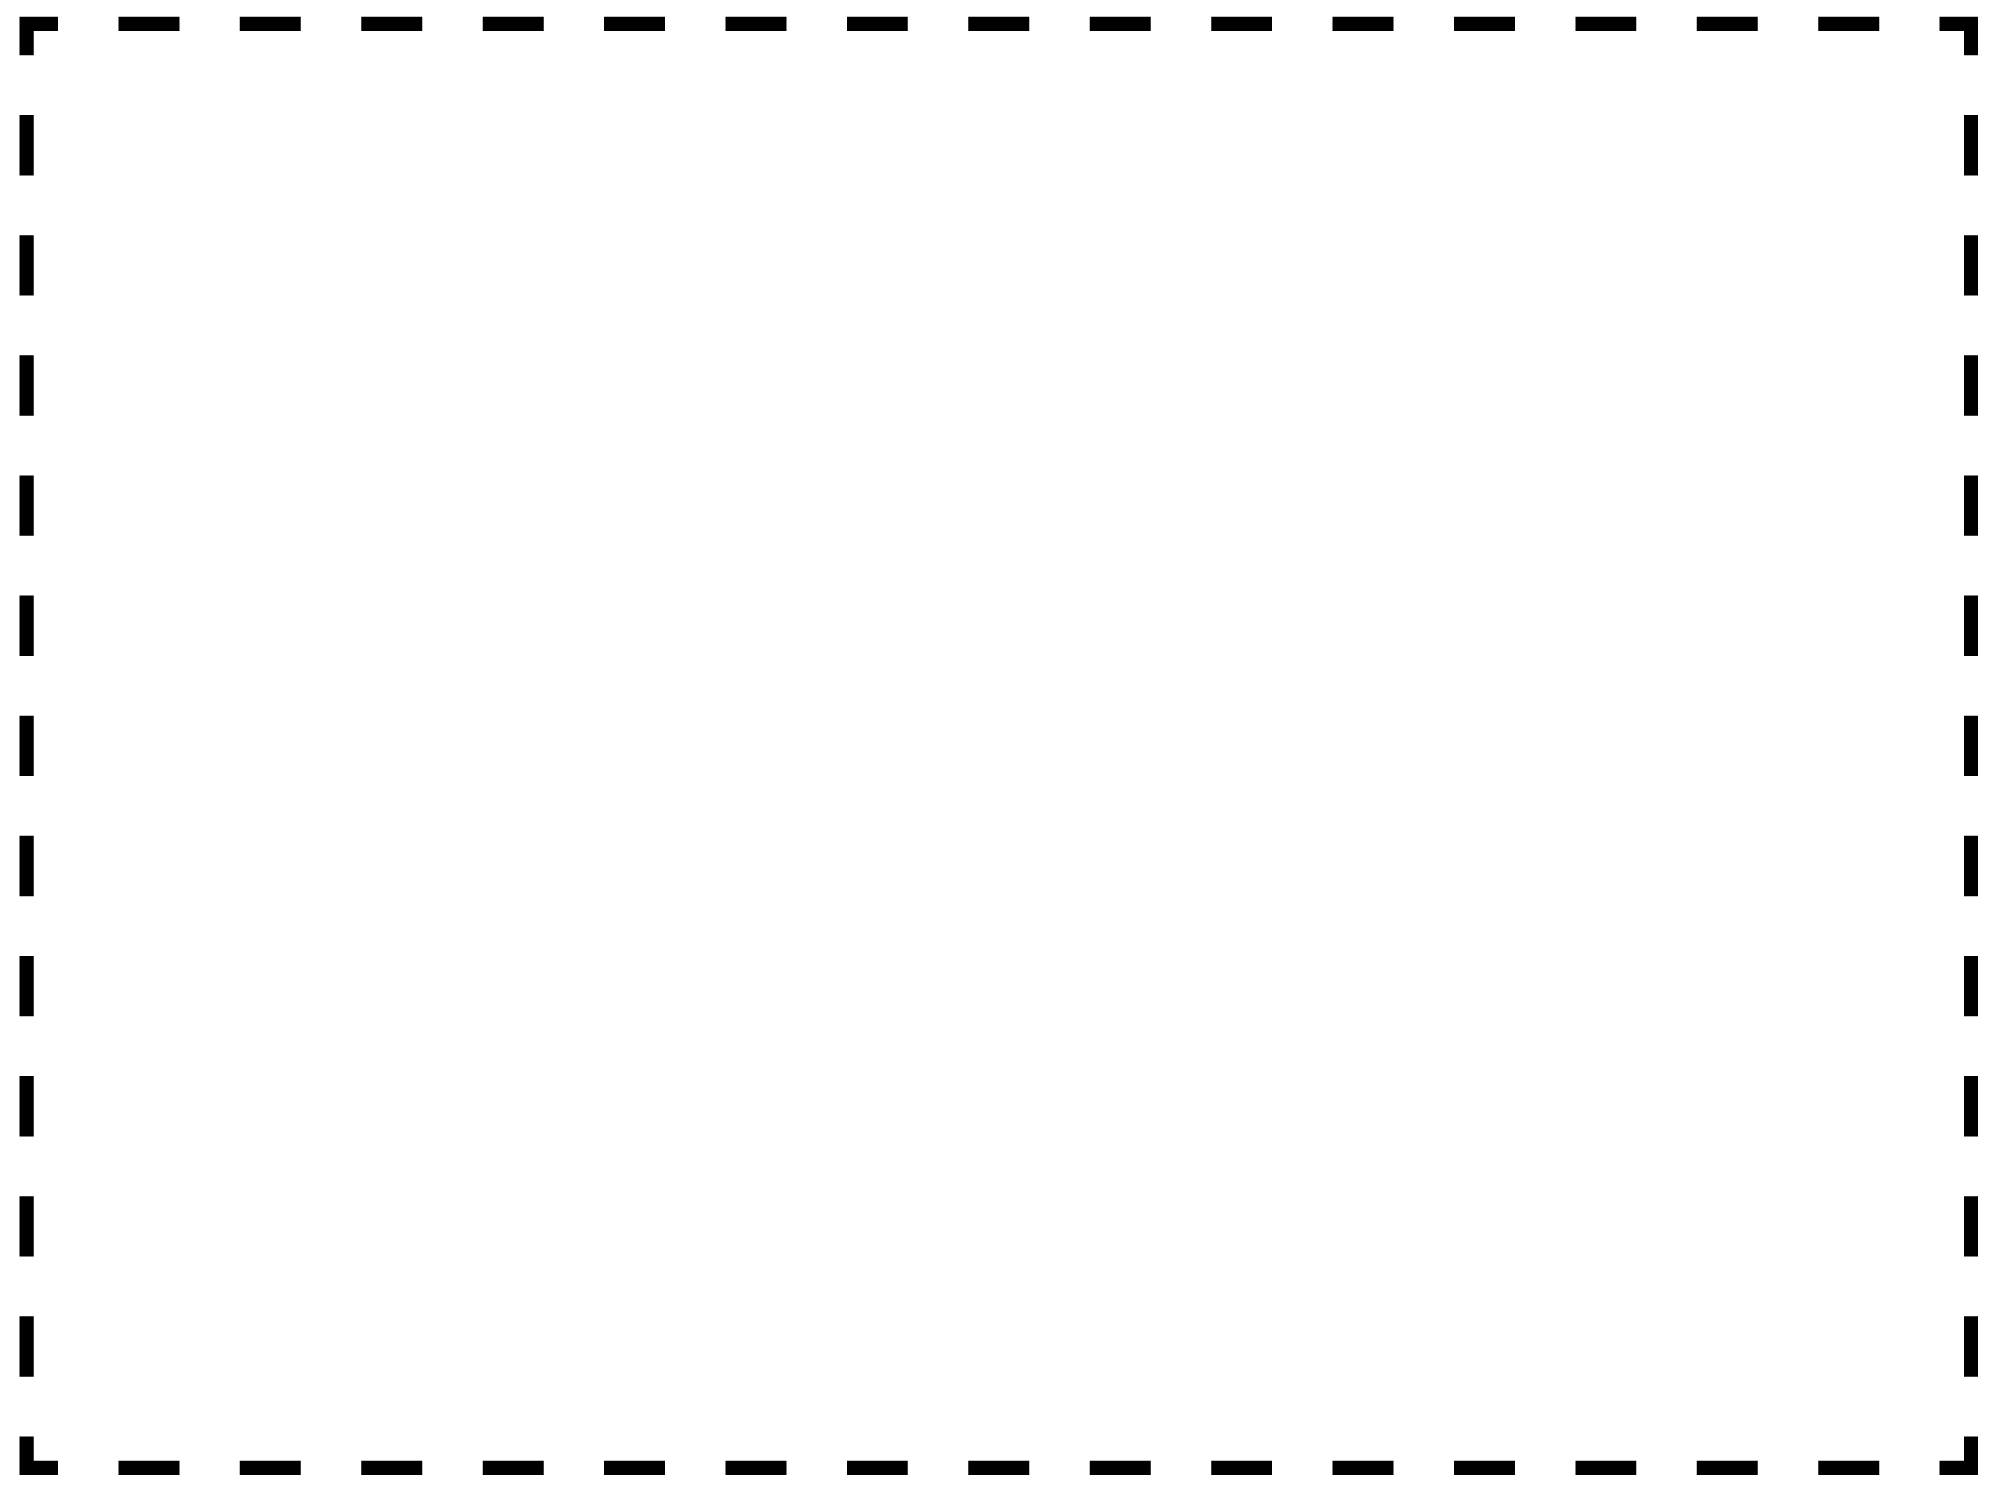 2516-coupon-outline-4x3-k-15441250345385.png